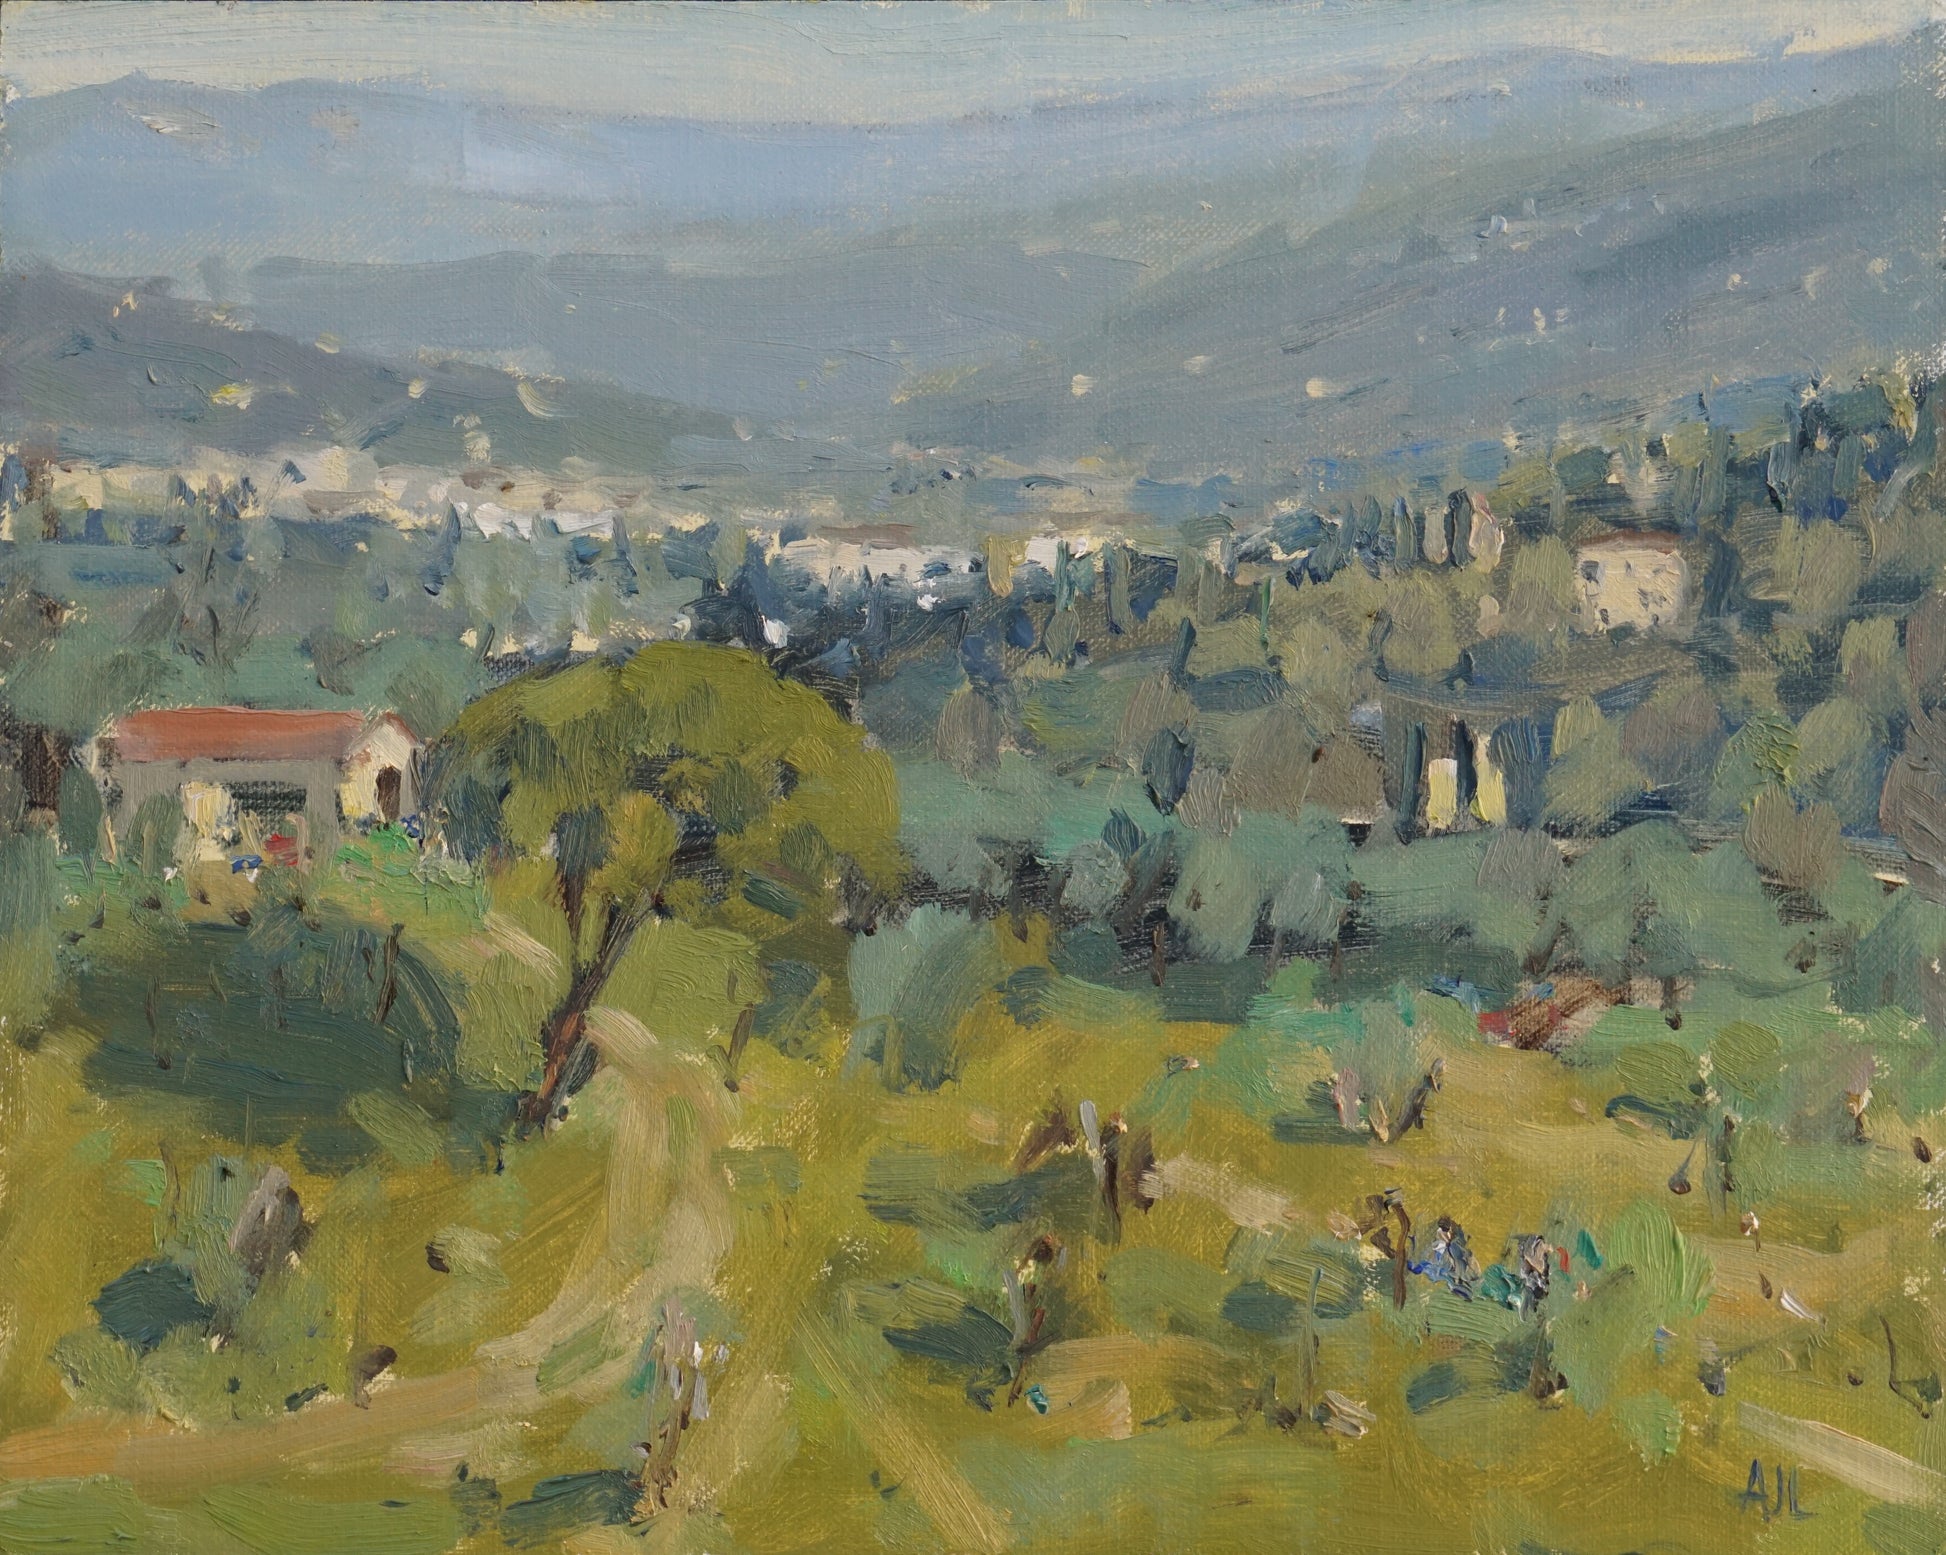 painting showing the countryside around florence with bright green grass and olive trees in the foreground and mountains in the distance